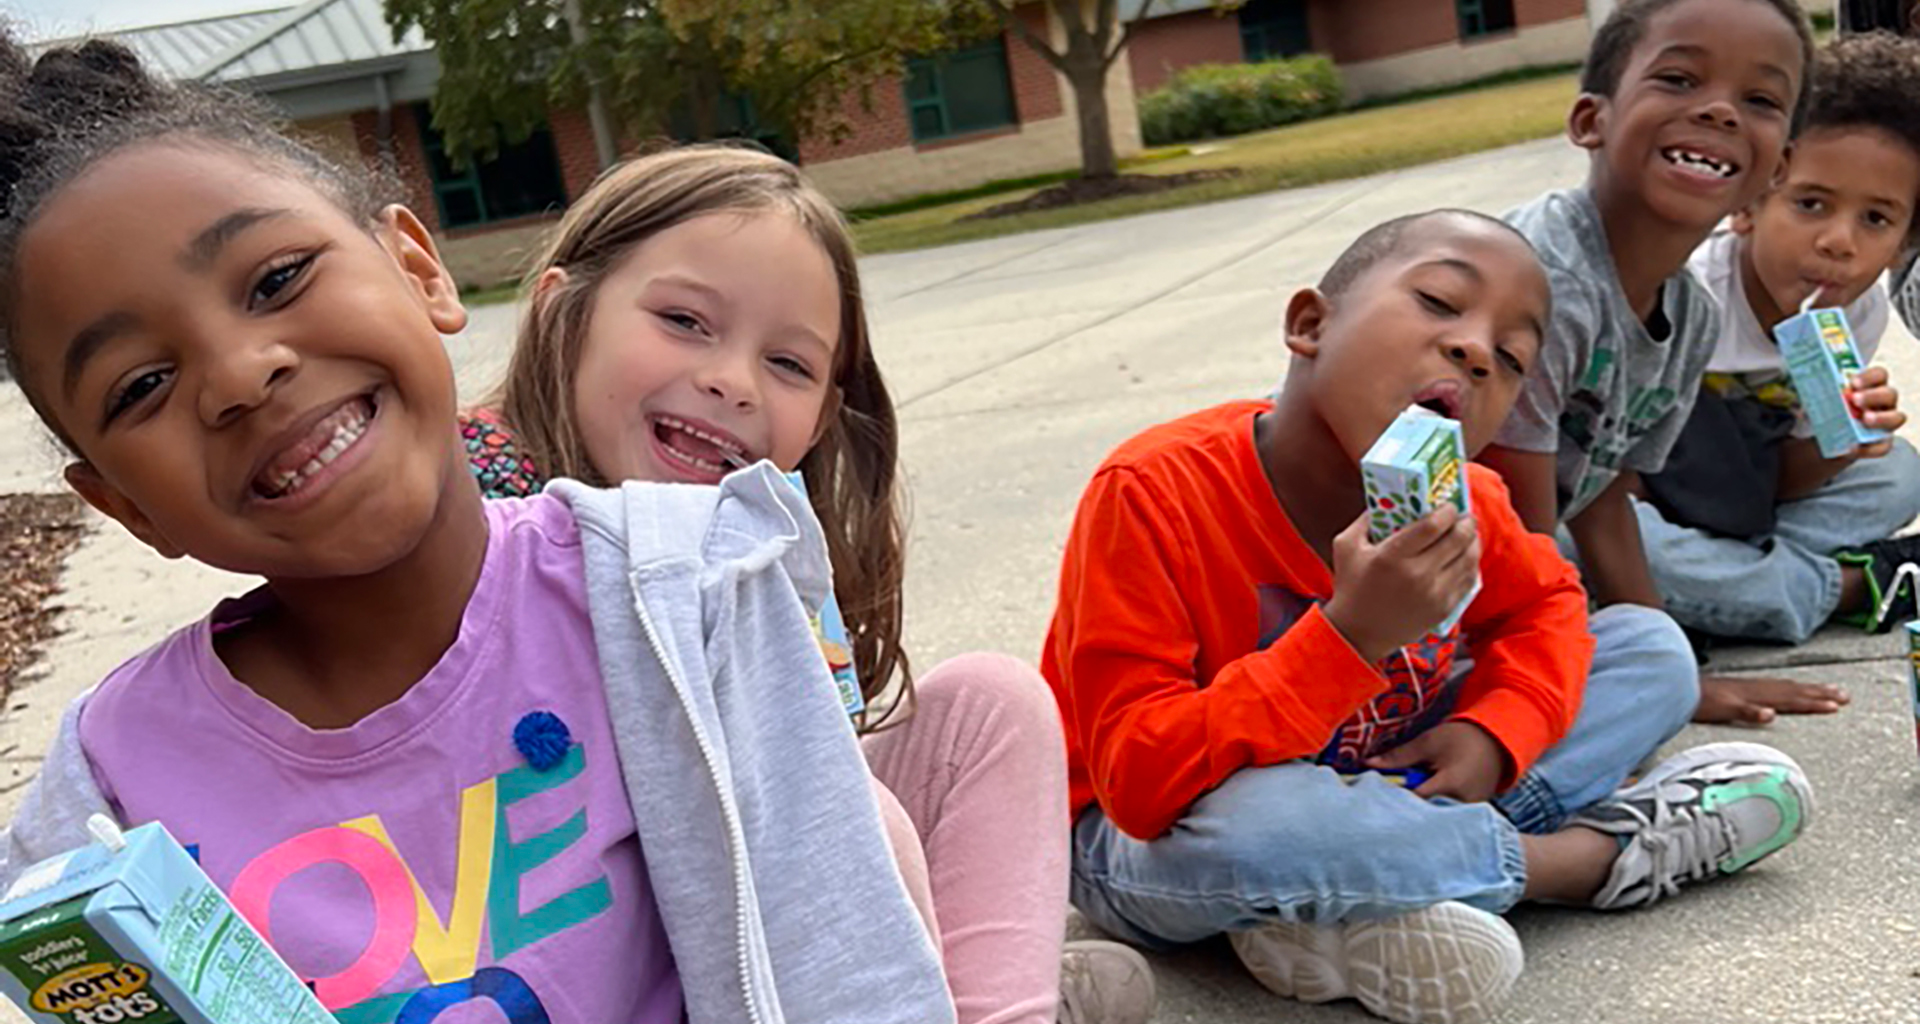 Children drinking juice boxes outside on the sidewalk